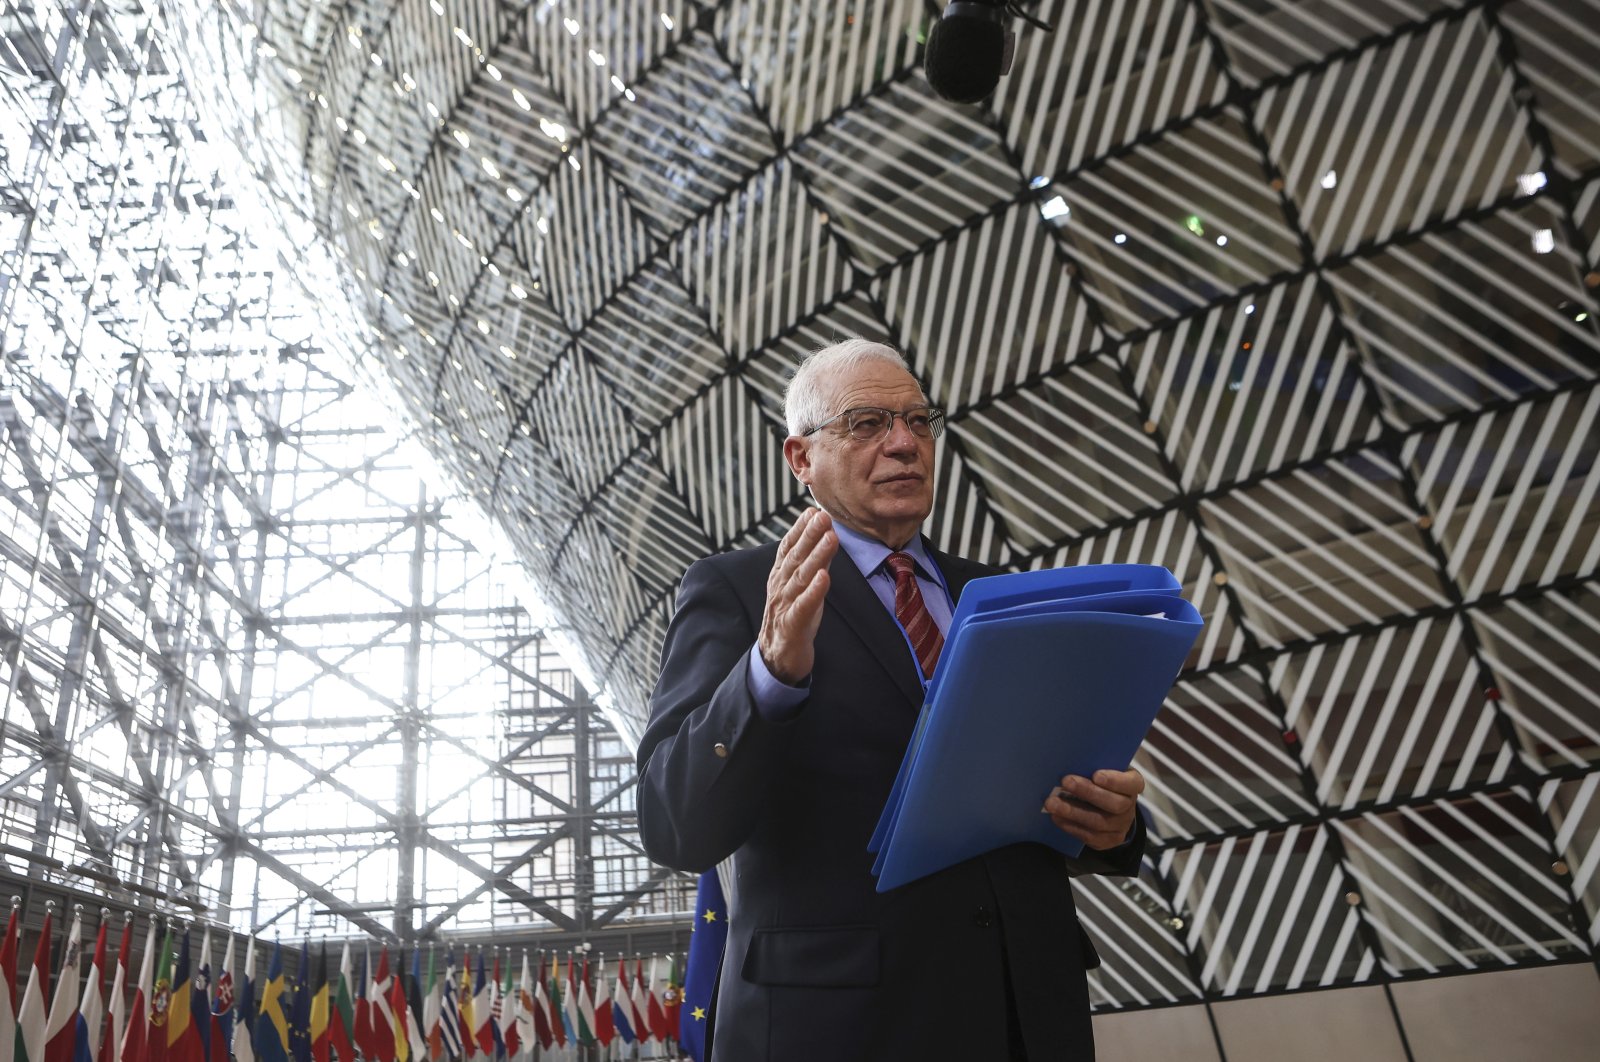 European Union foreign policy chief Josep Borrell speaks to the media prior to a meeting of European ministers of foreign affairs, at the European Council headquarters in Brussels, Belgium, March 22, 2021. (AP)